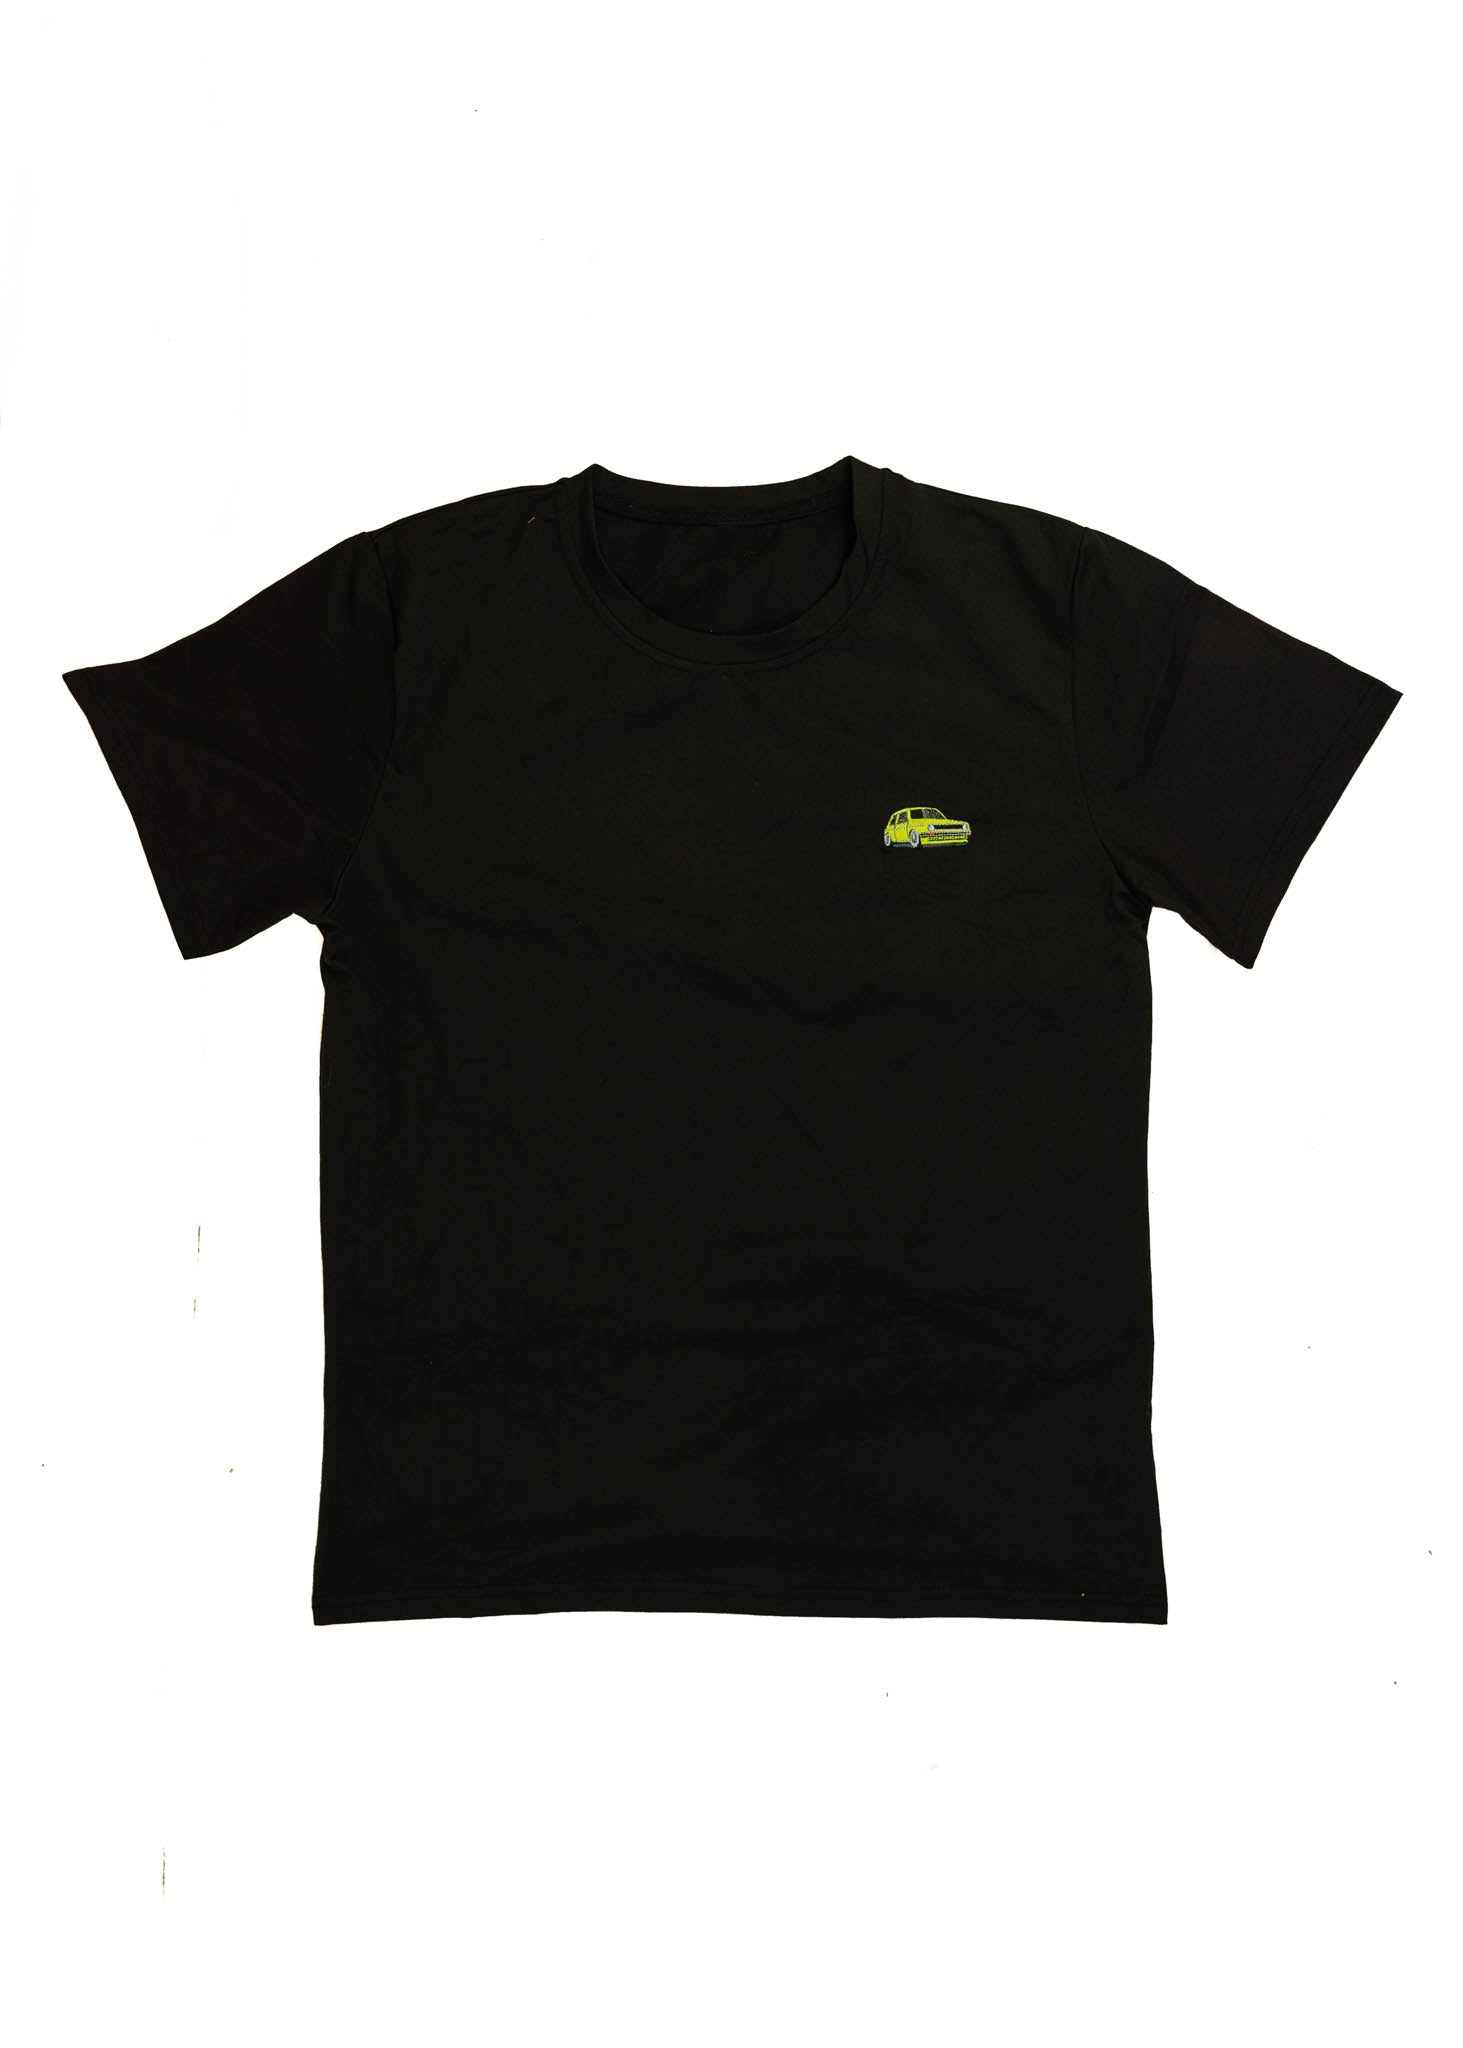 A black VW VolkswagenT-Shirt for men. Photo is a front view of the shirt with an embroidered modified green Mk1 Golf. Fabric composition is 100% polyester. The material is very stretchy, soft, comfortable, breathable, and non-transparent. The style of this shirt is short sleeve, with a crewneck neckline.